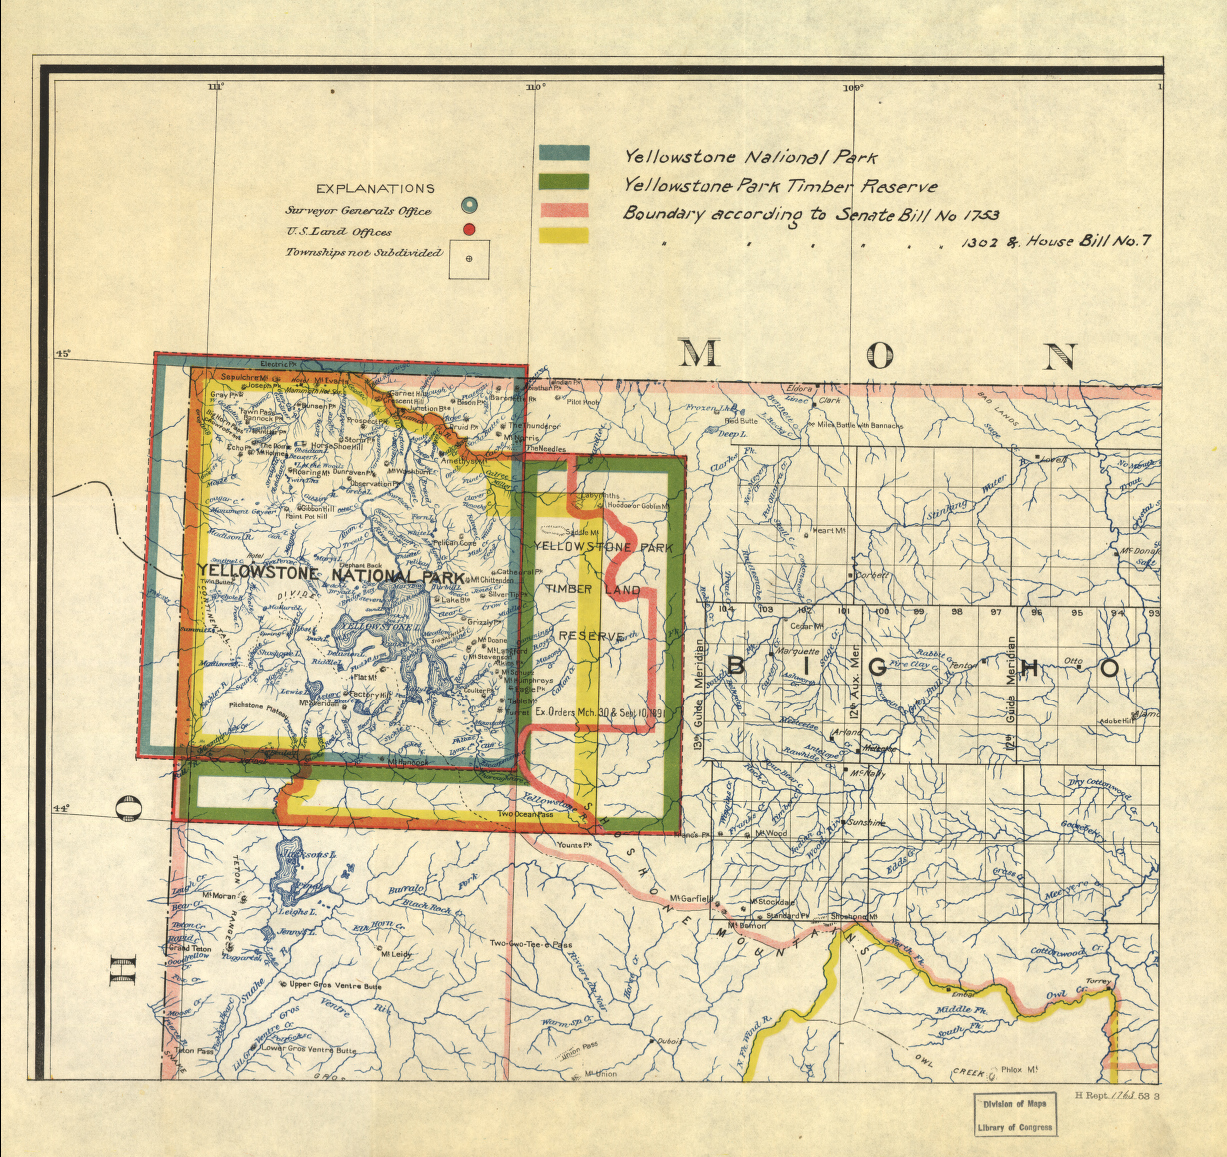 Yellowstone National Park Timber Map from the Library of Congress Collection